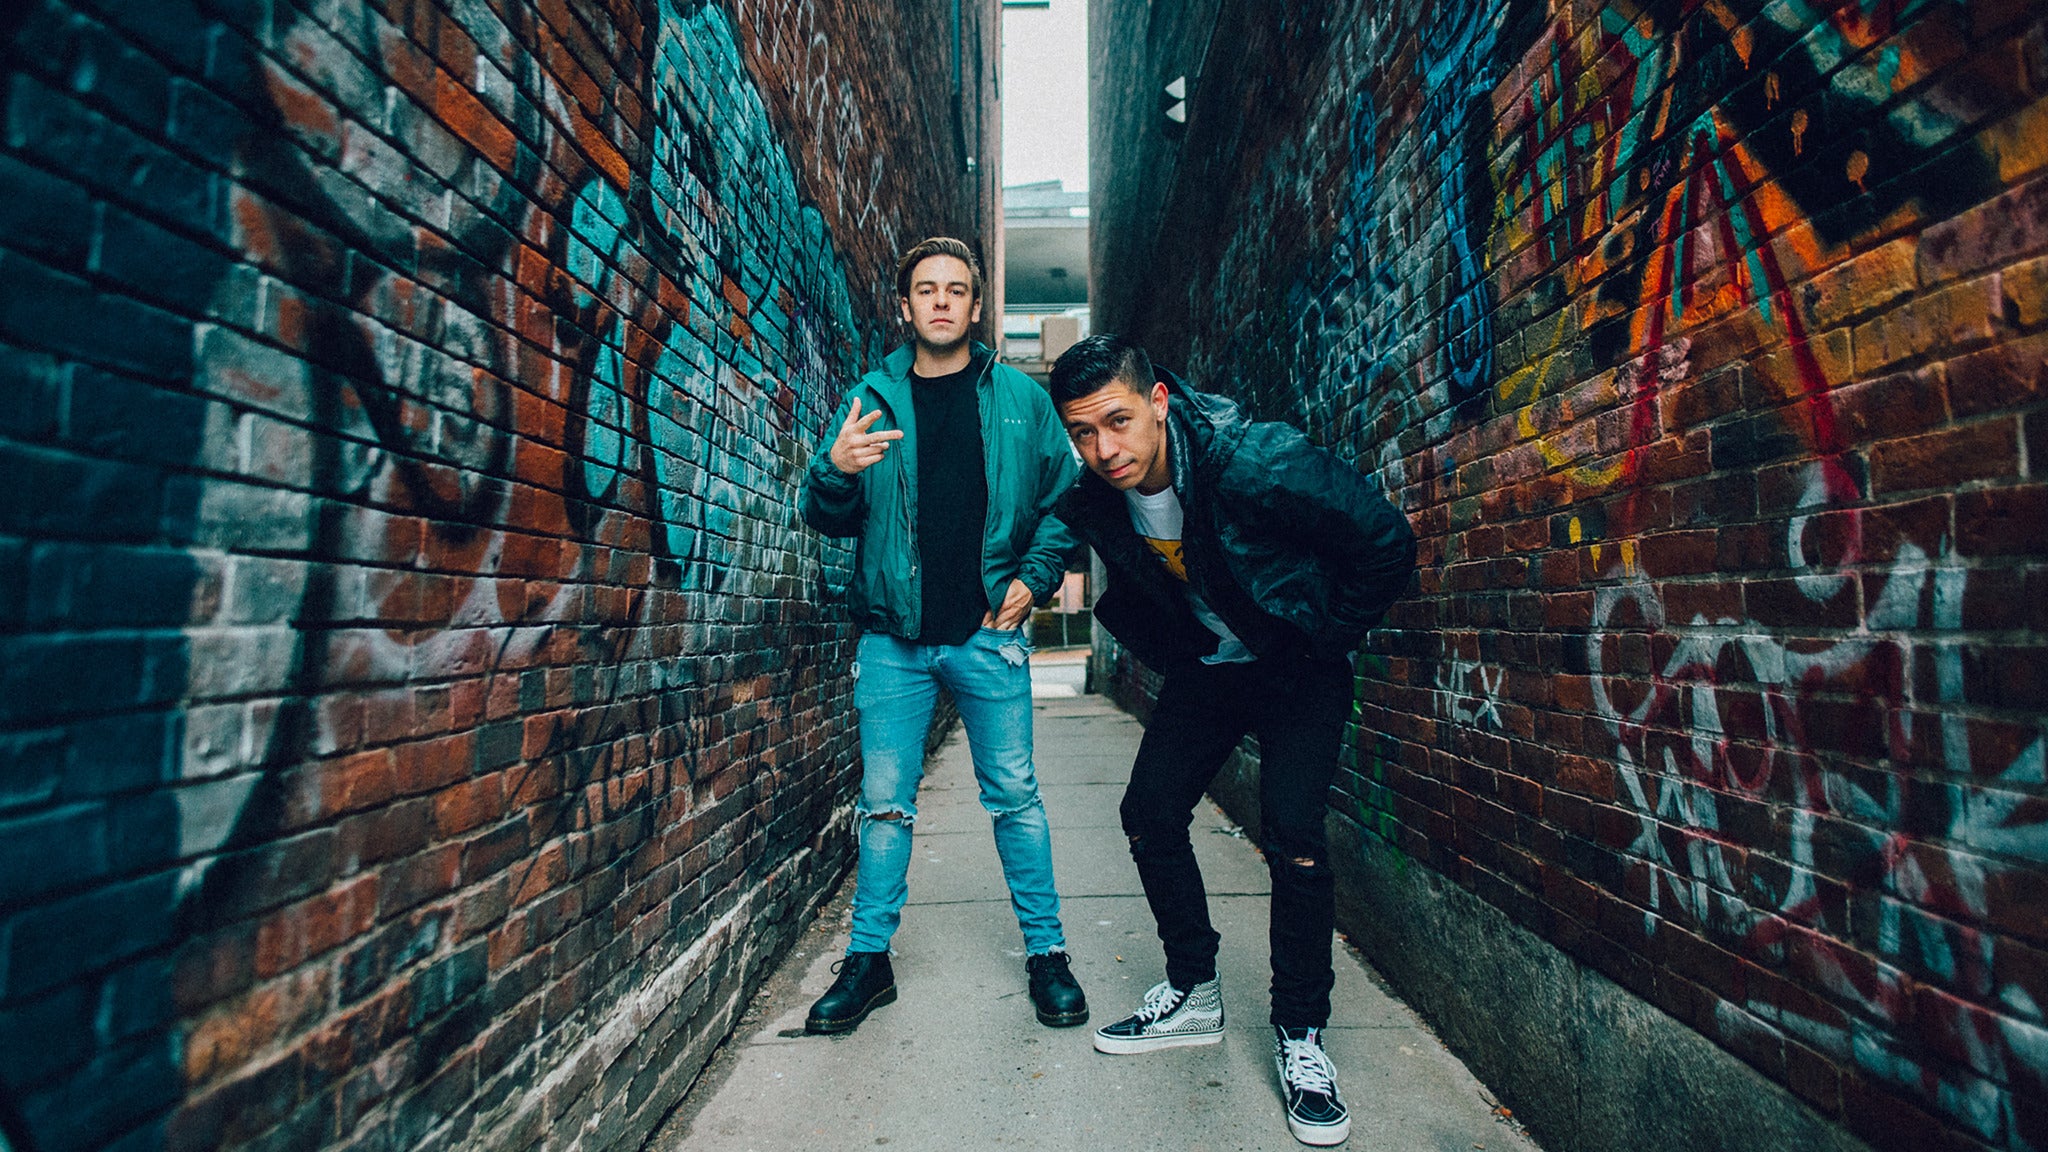 Cody Ko & Noel Miller: Tiny Meat Gang - Global Domination in Orlando promo photo for Pre-Show Hang Out with Tiny Meat Gang presale offer code